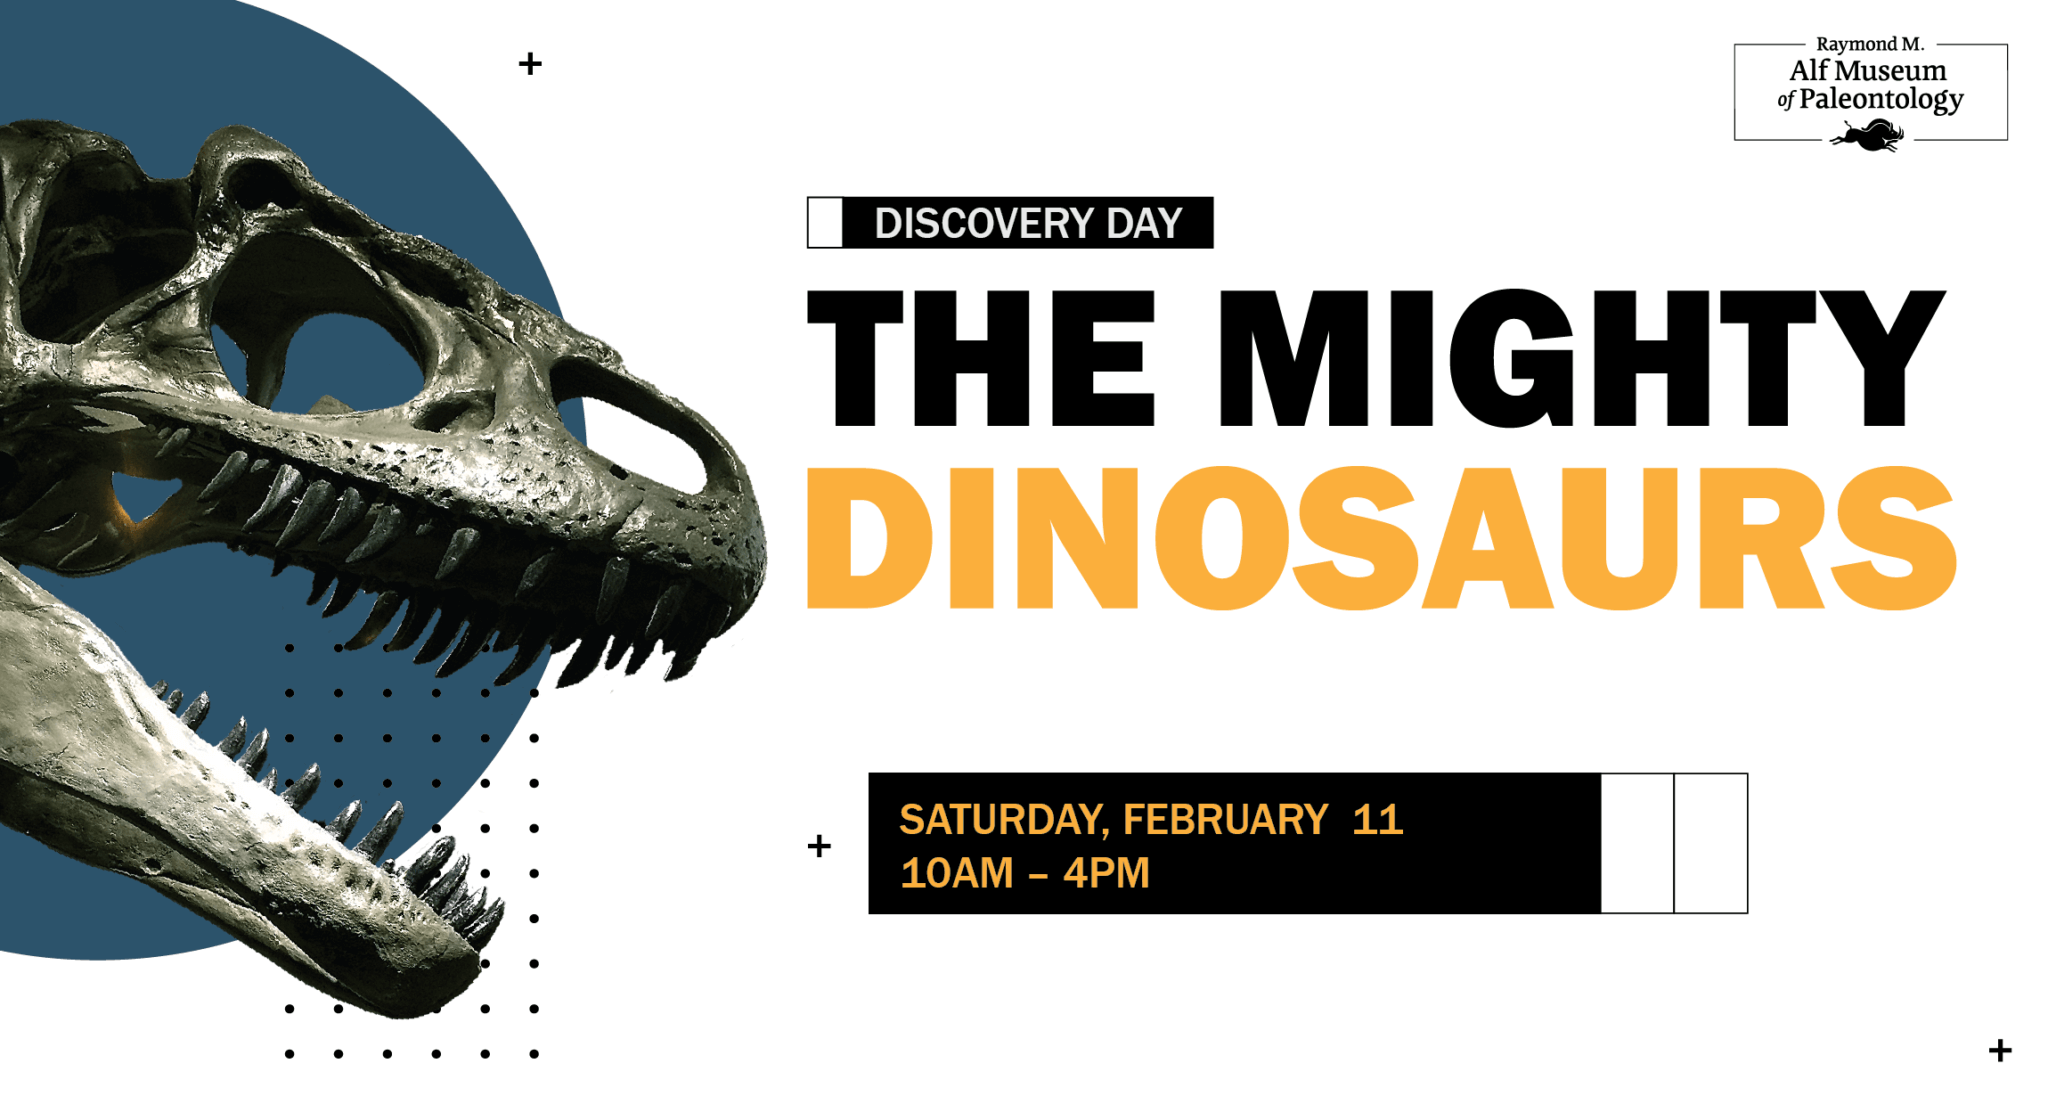 Image with an Allosaurs skull showing on the left side in front of a blue circle. Text reads: Discovery Day, The Mighty Dinosaurs, Saturday, February 11, 10am - 4pm